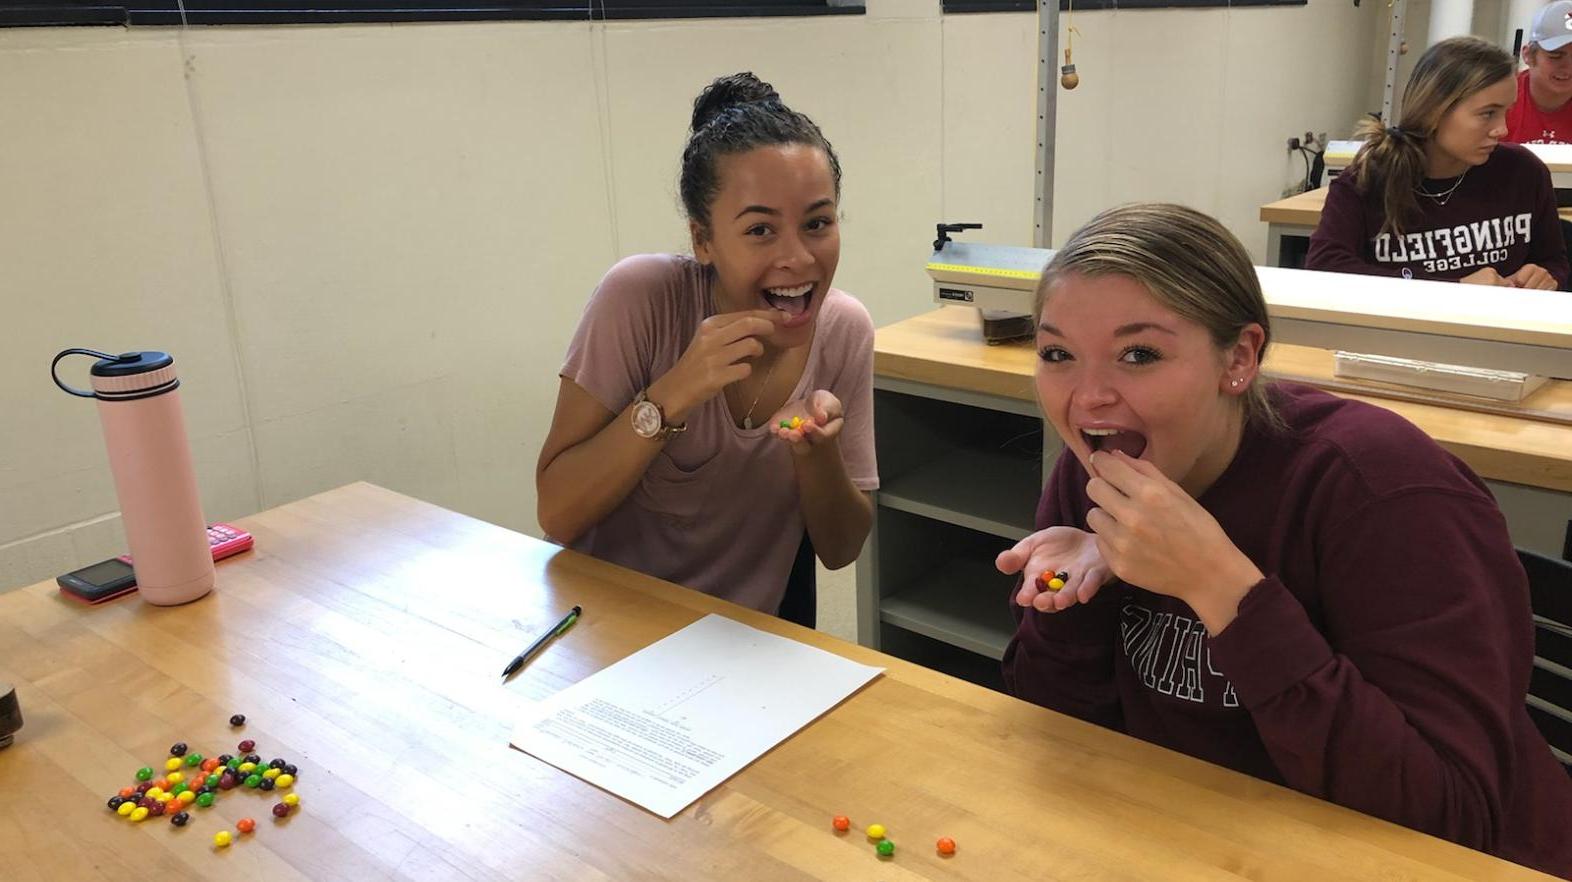 Two female students pretend to eat skittles during a math assignment